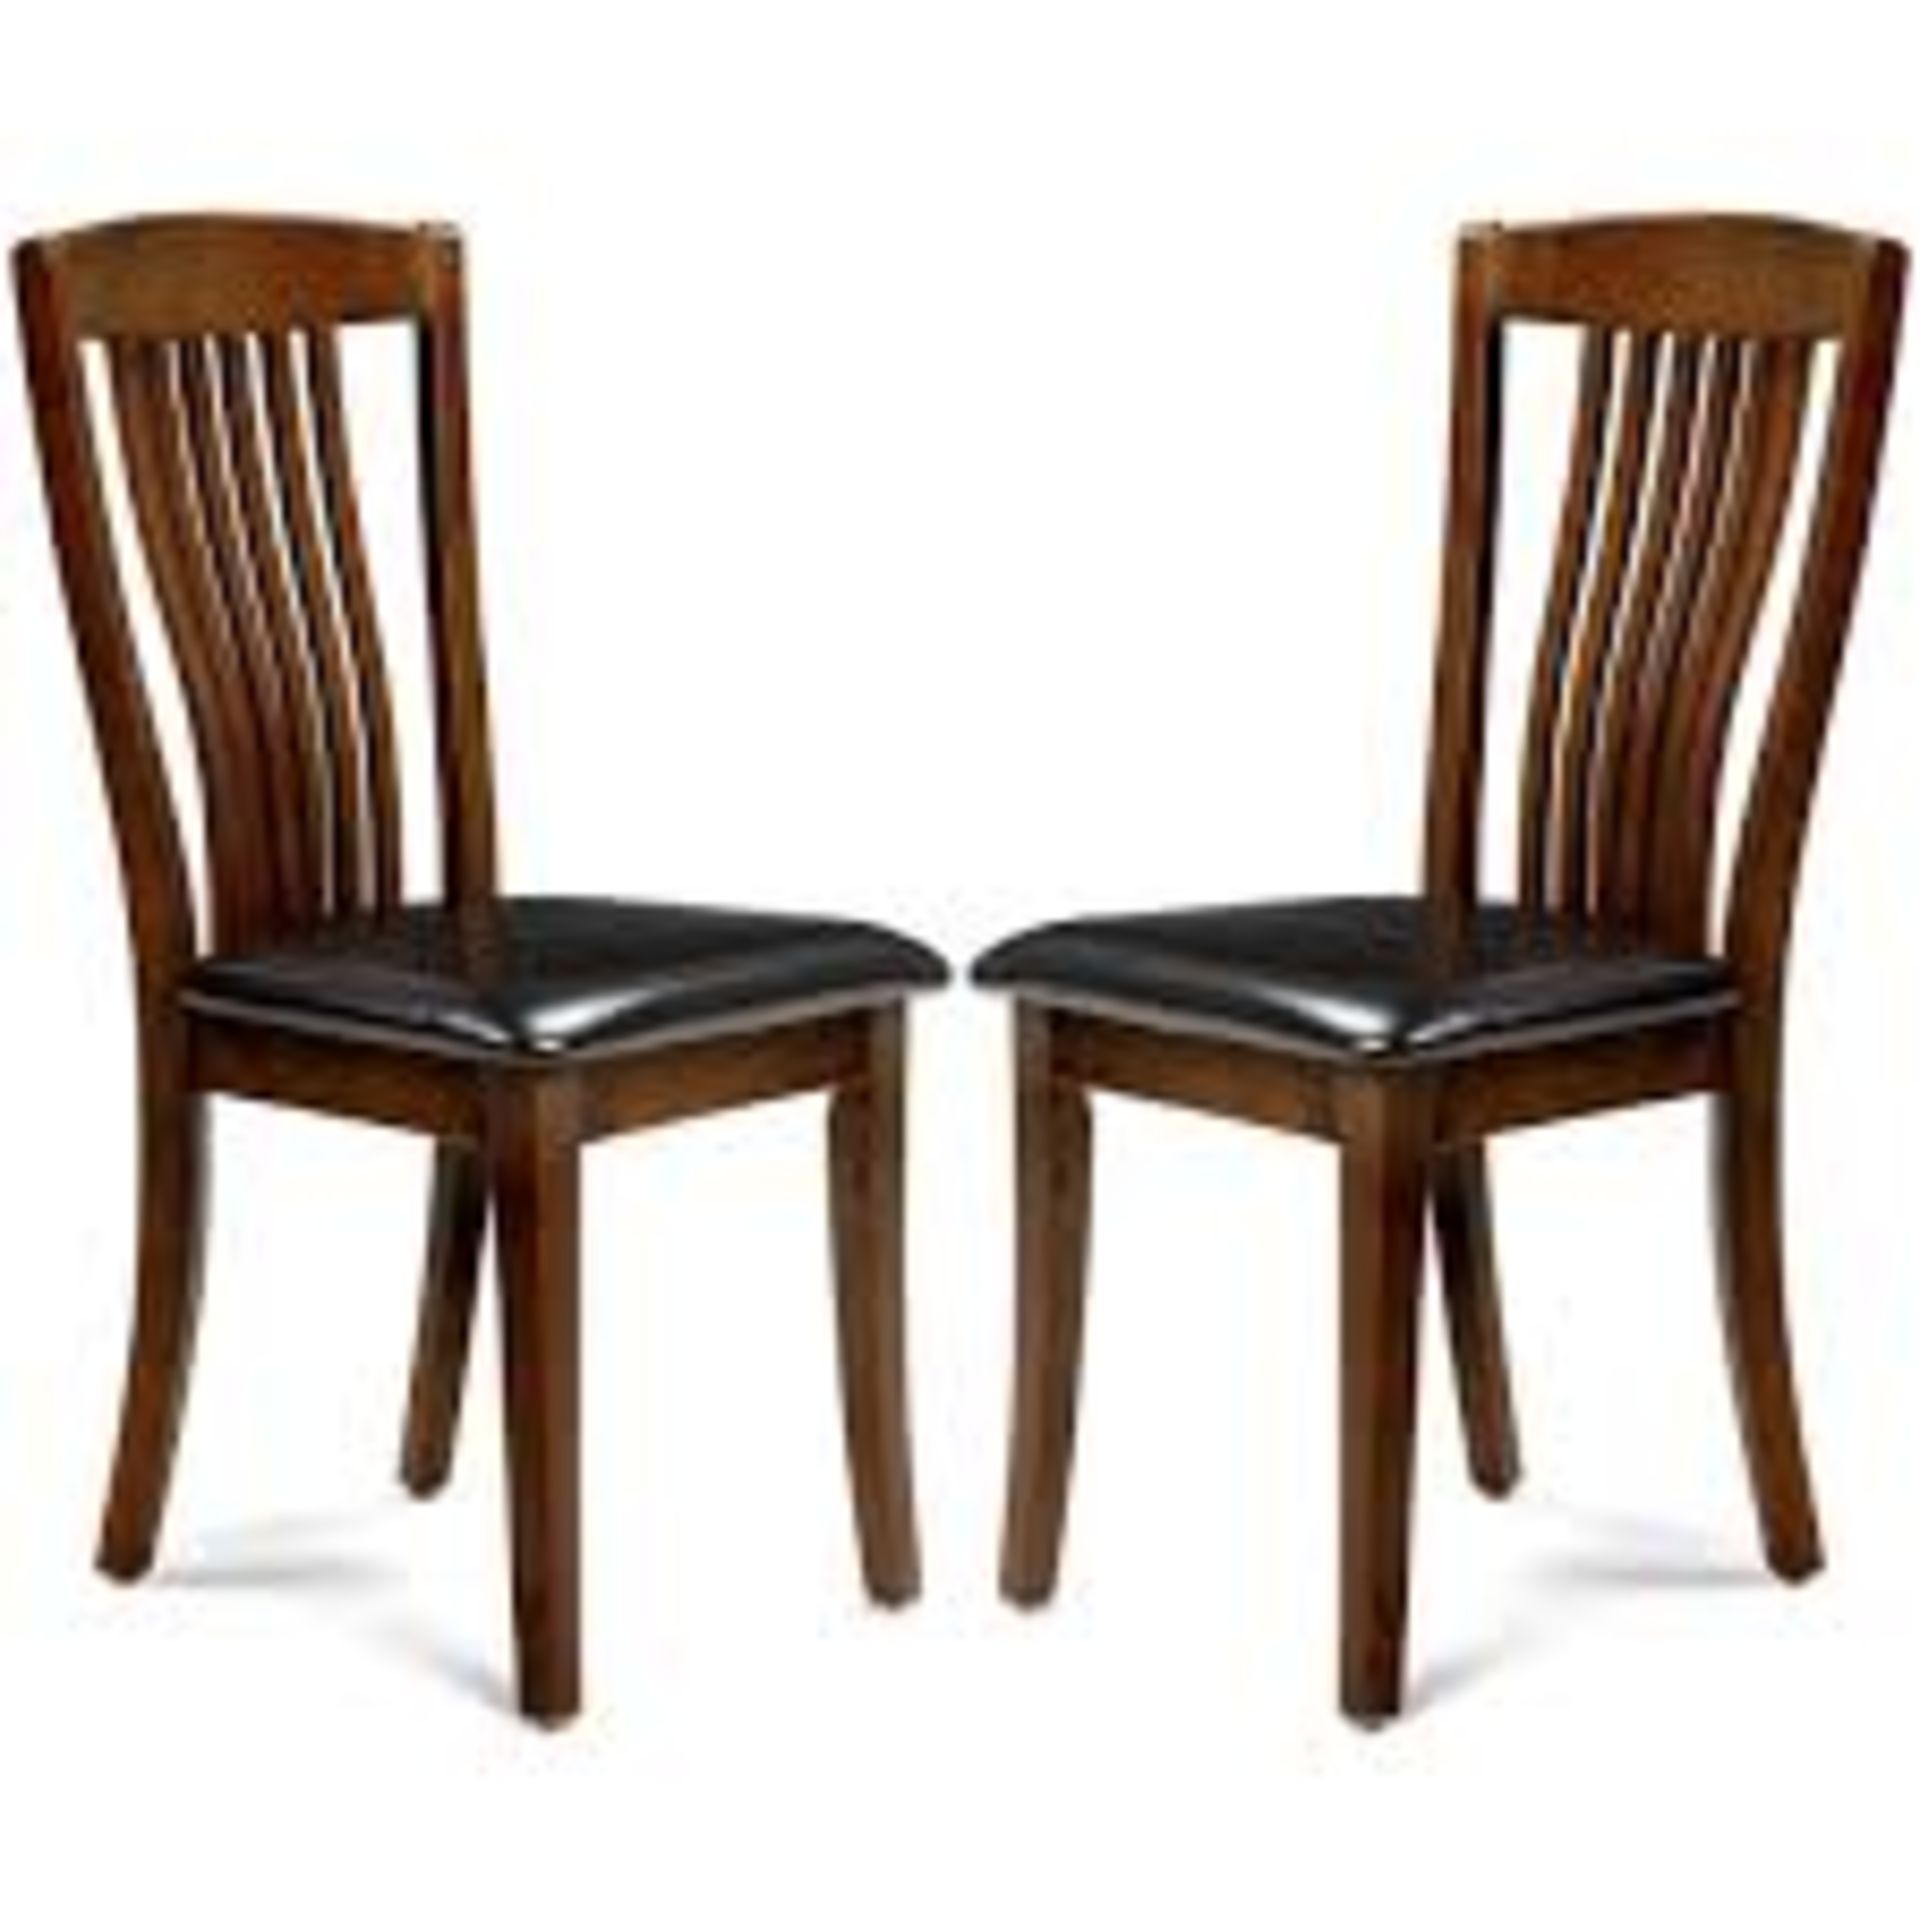 Boxed Pack Of 2 3Posts Remsen Solid Wooden Dining Chairs RRP £110 (18244) (Appraisals Are